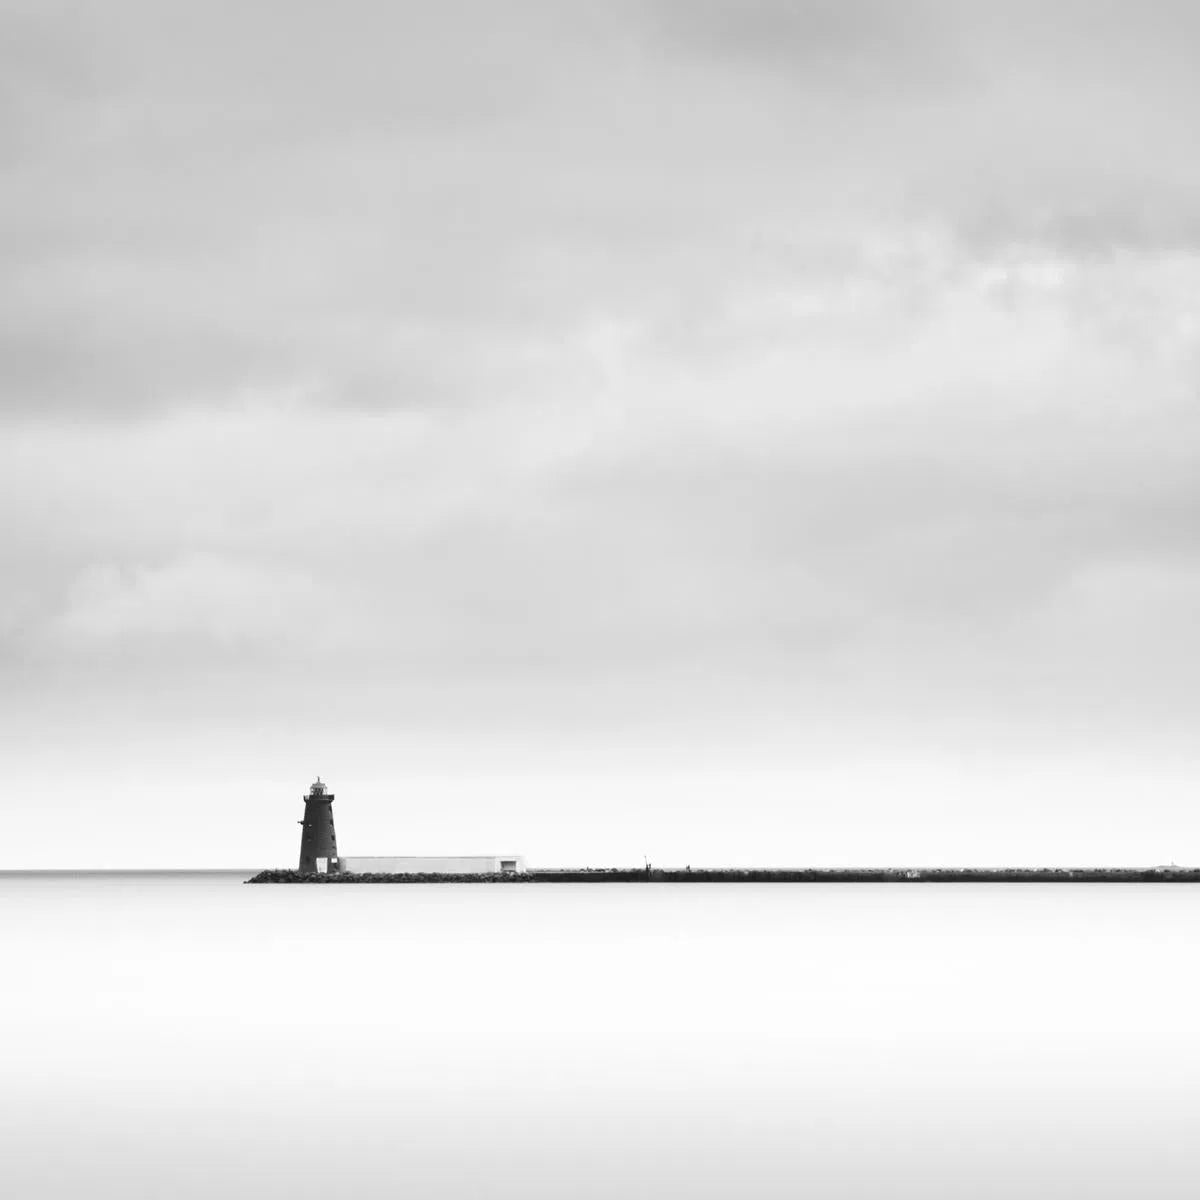 South Bull Wall Lighthouse, by Maggy Morrissey-PurePhoto